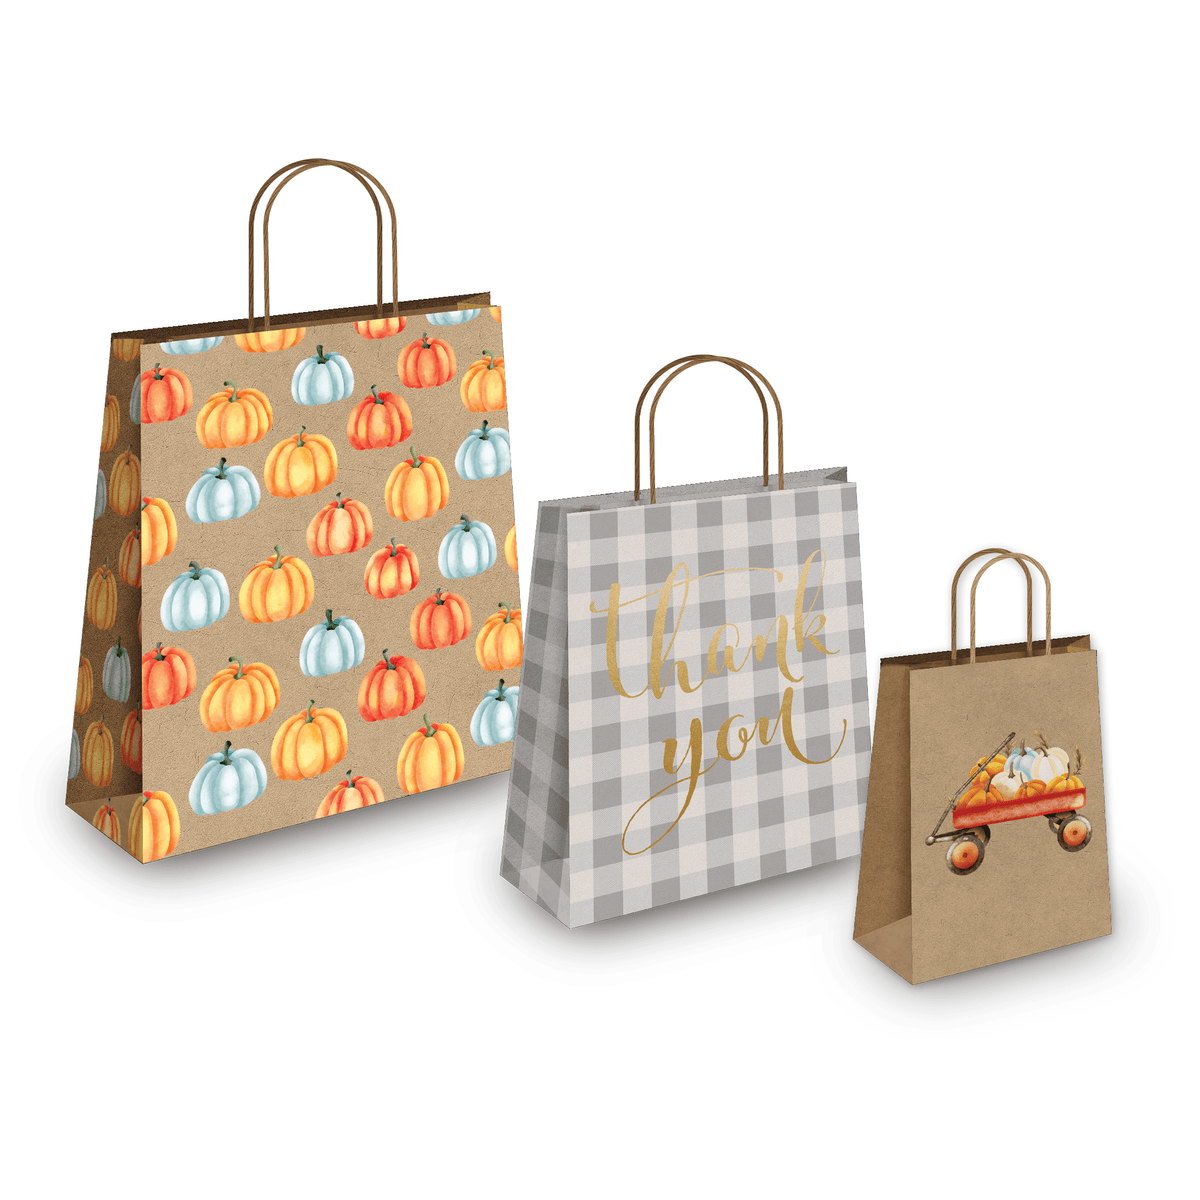 design luxury shopping bag and paper bag